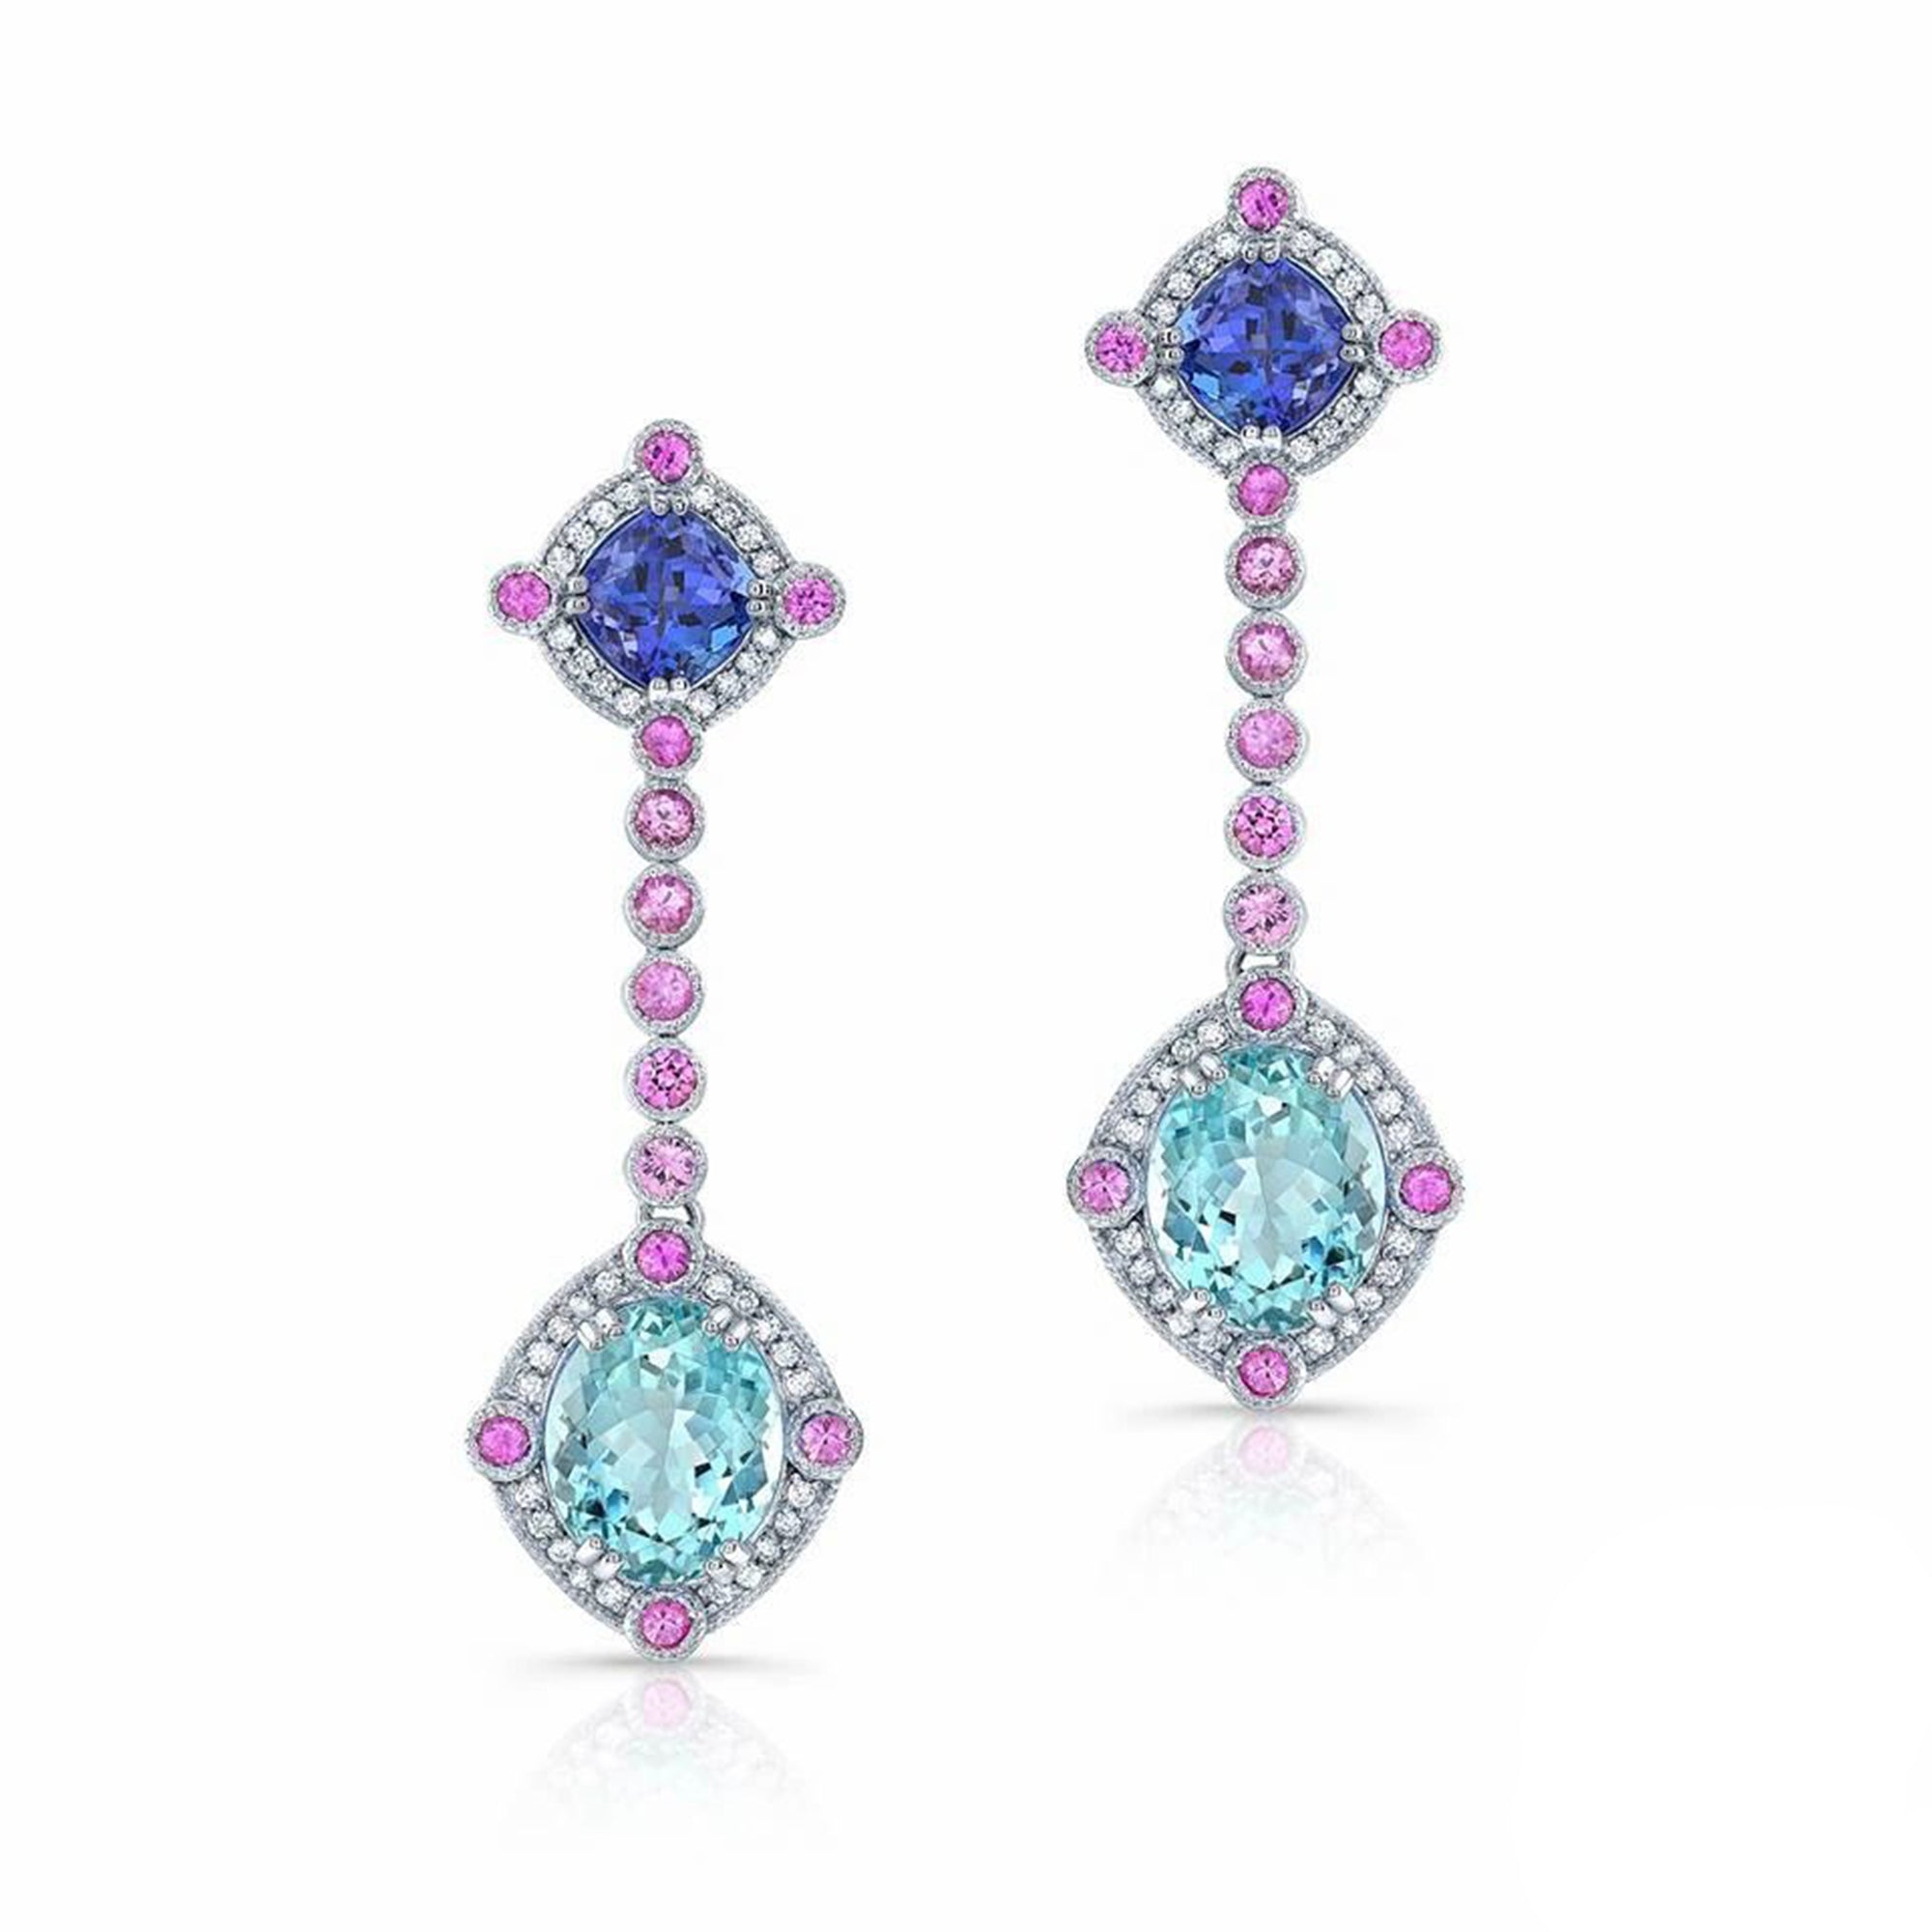 Aquamarine, Tanzanite and Pink Sapphire, 18k White Gold Earrings - Talisman Collection Fine Jewelers